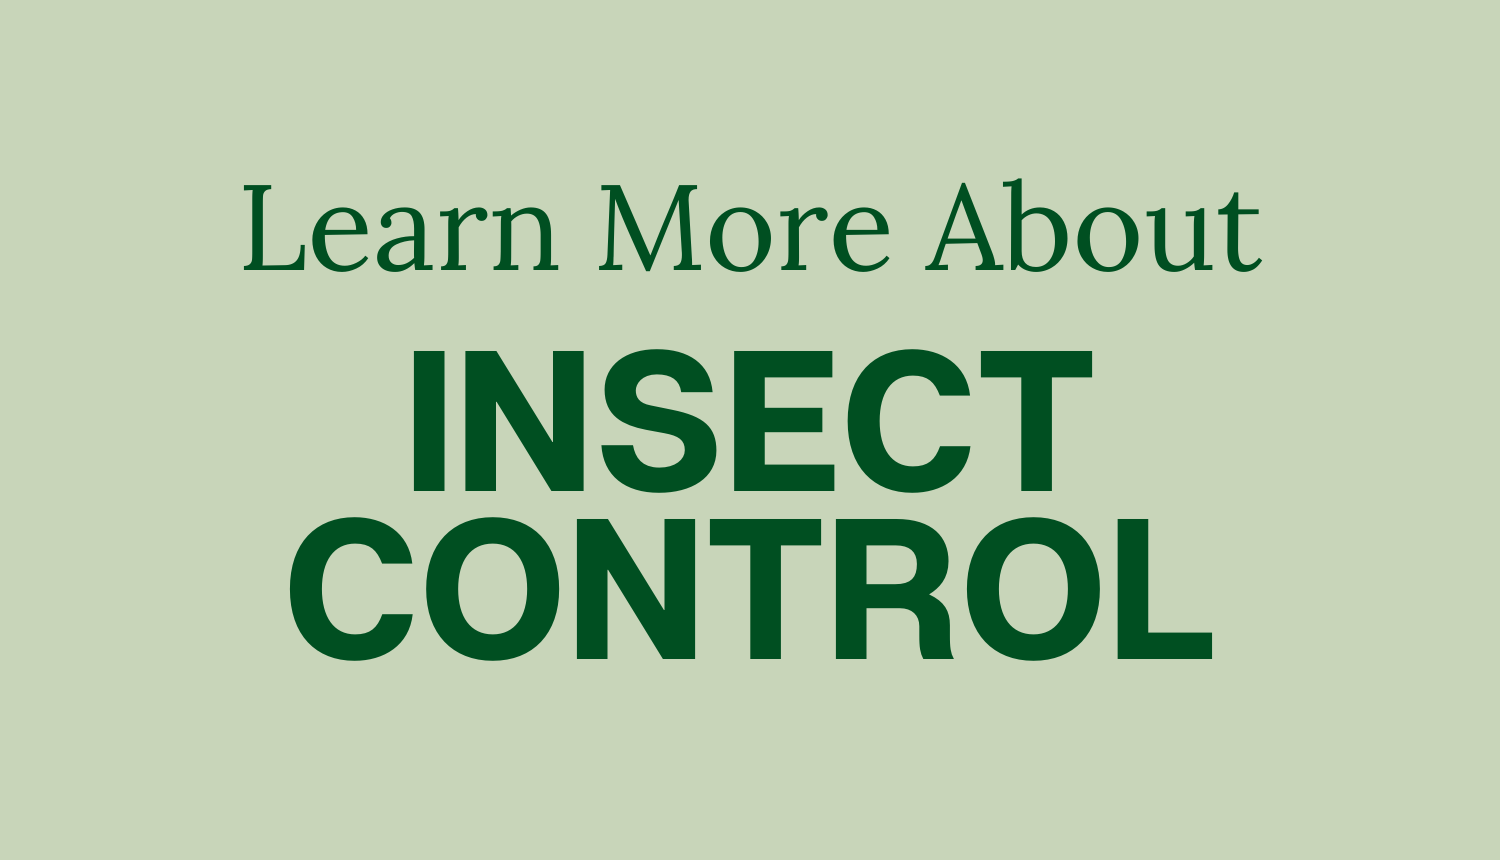 Learn More About Insect Control